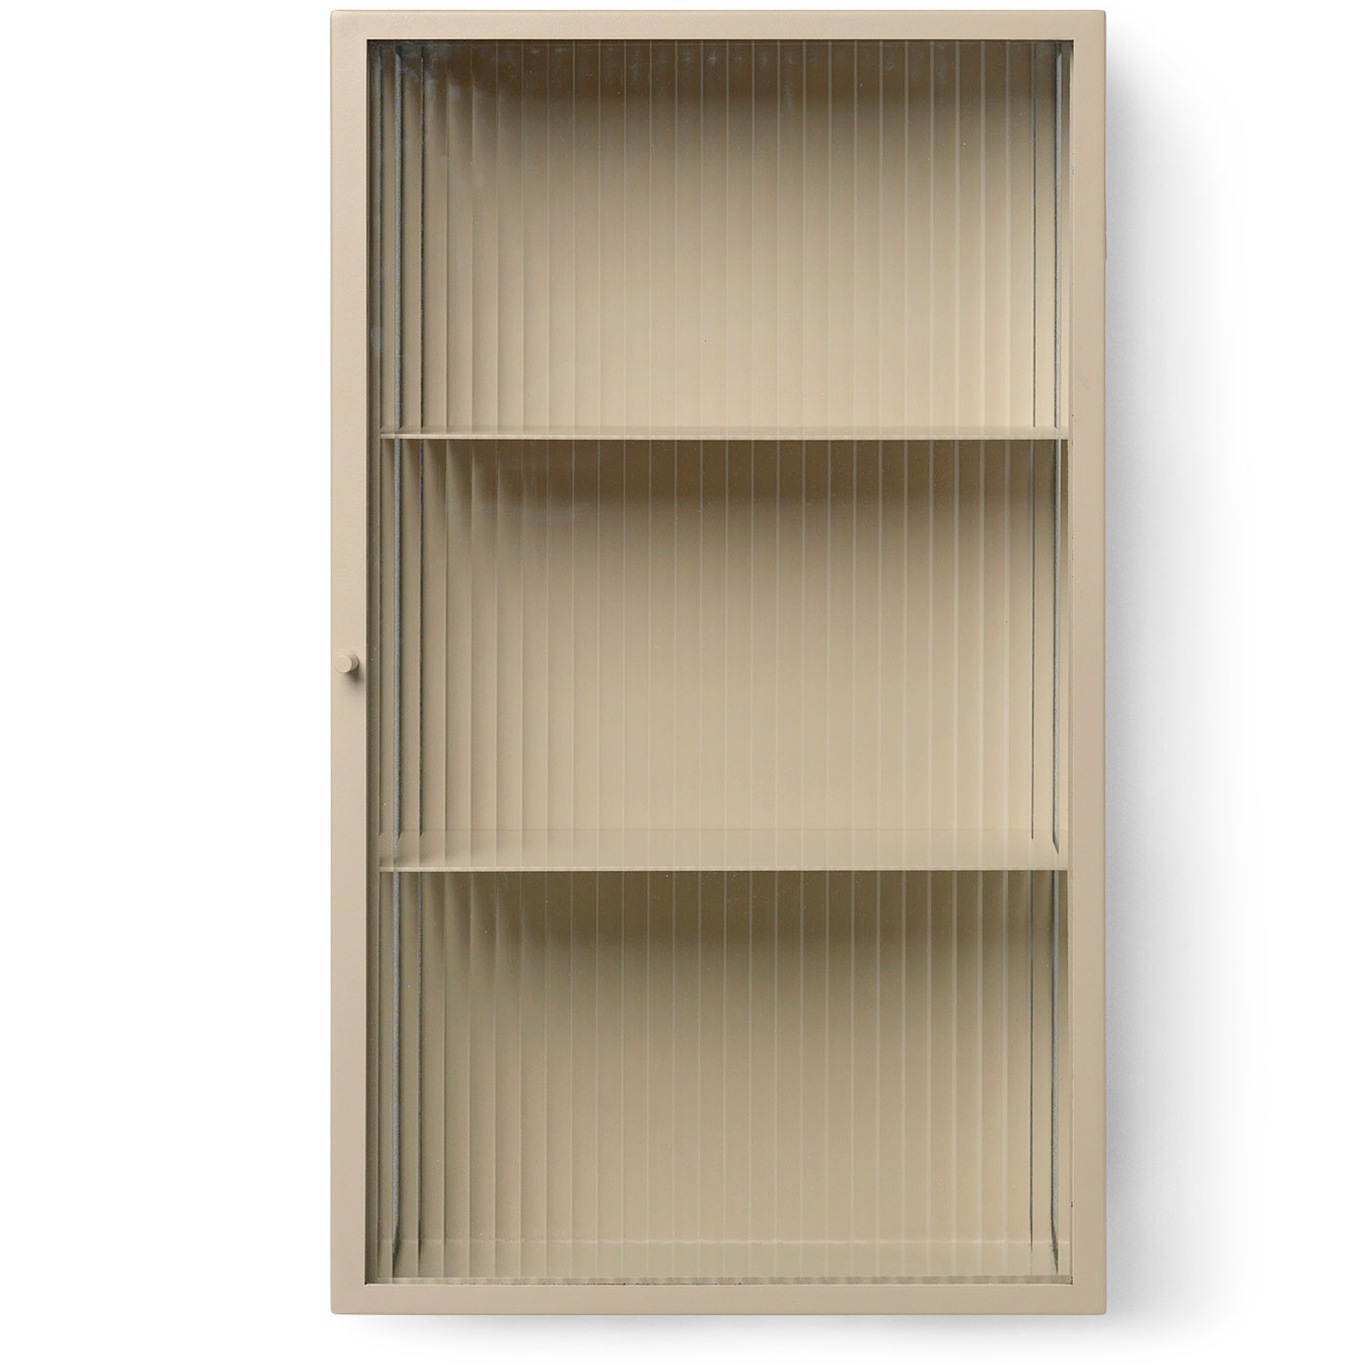 Haze Wall Cabinet - Reeded Glas - Cashme